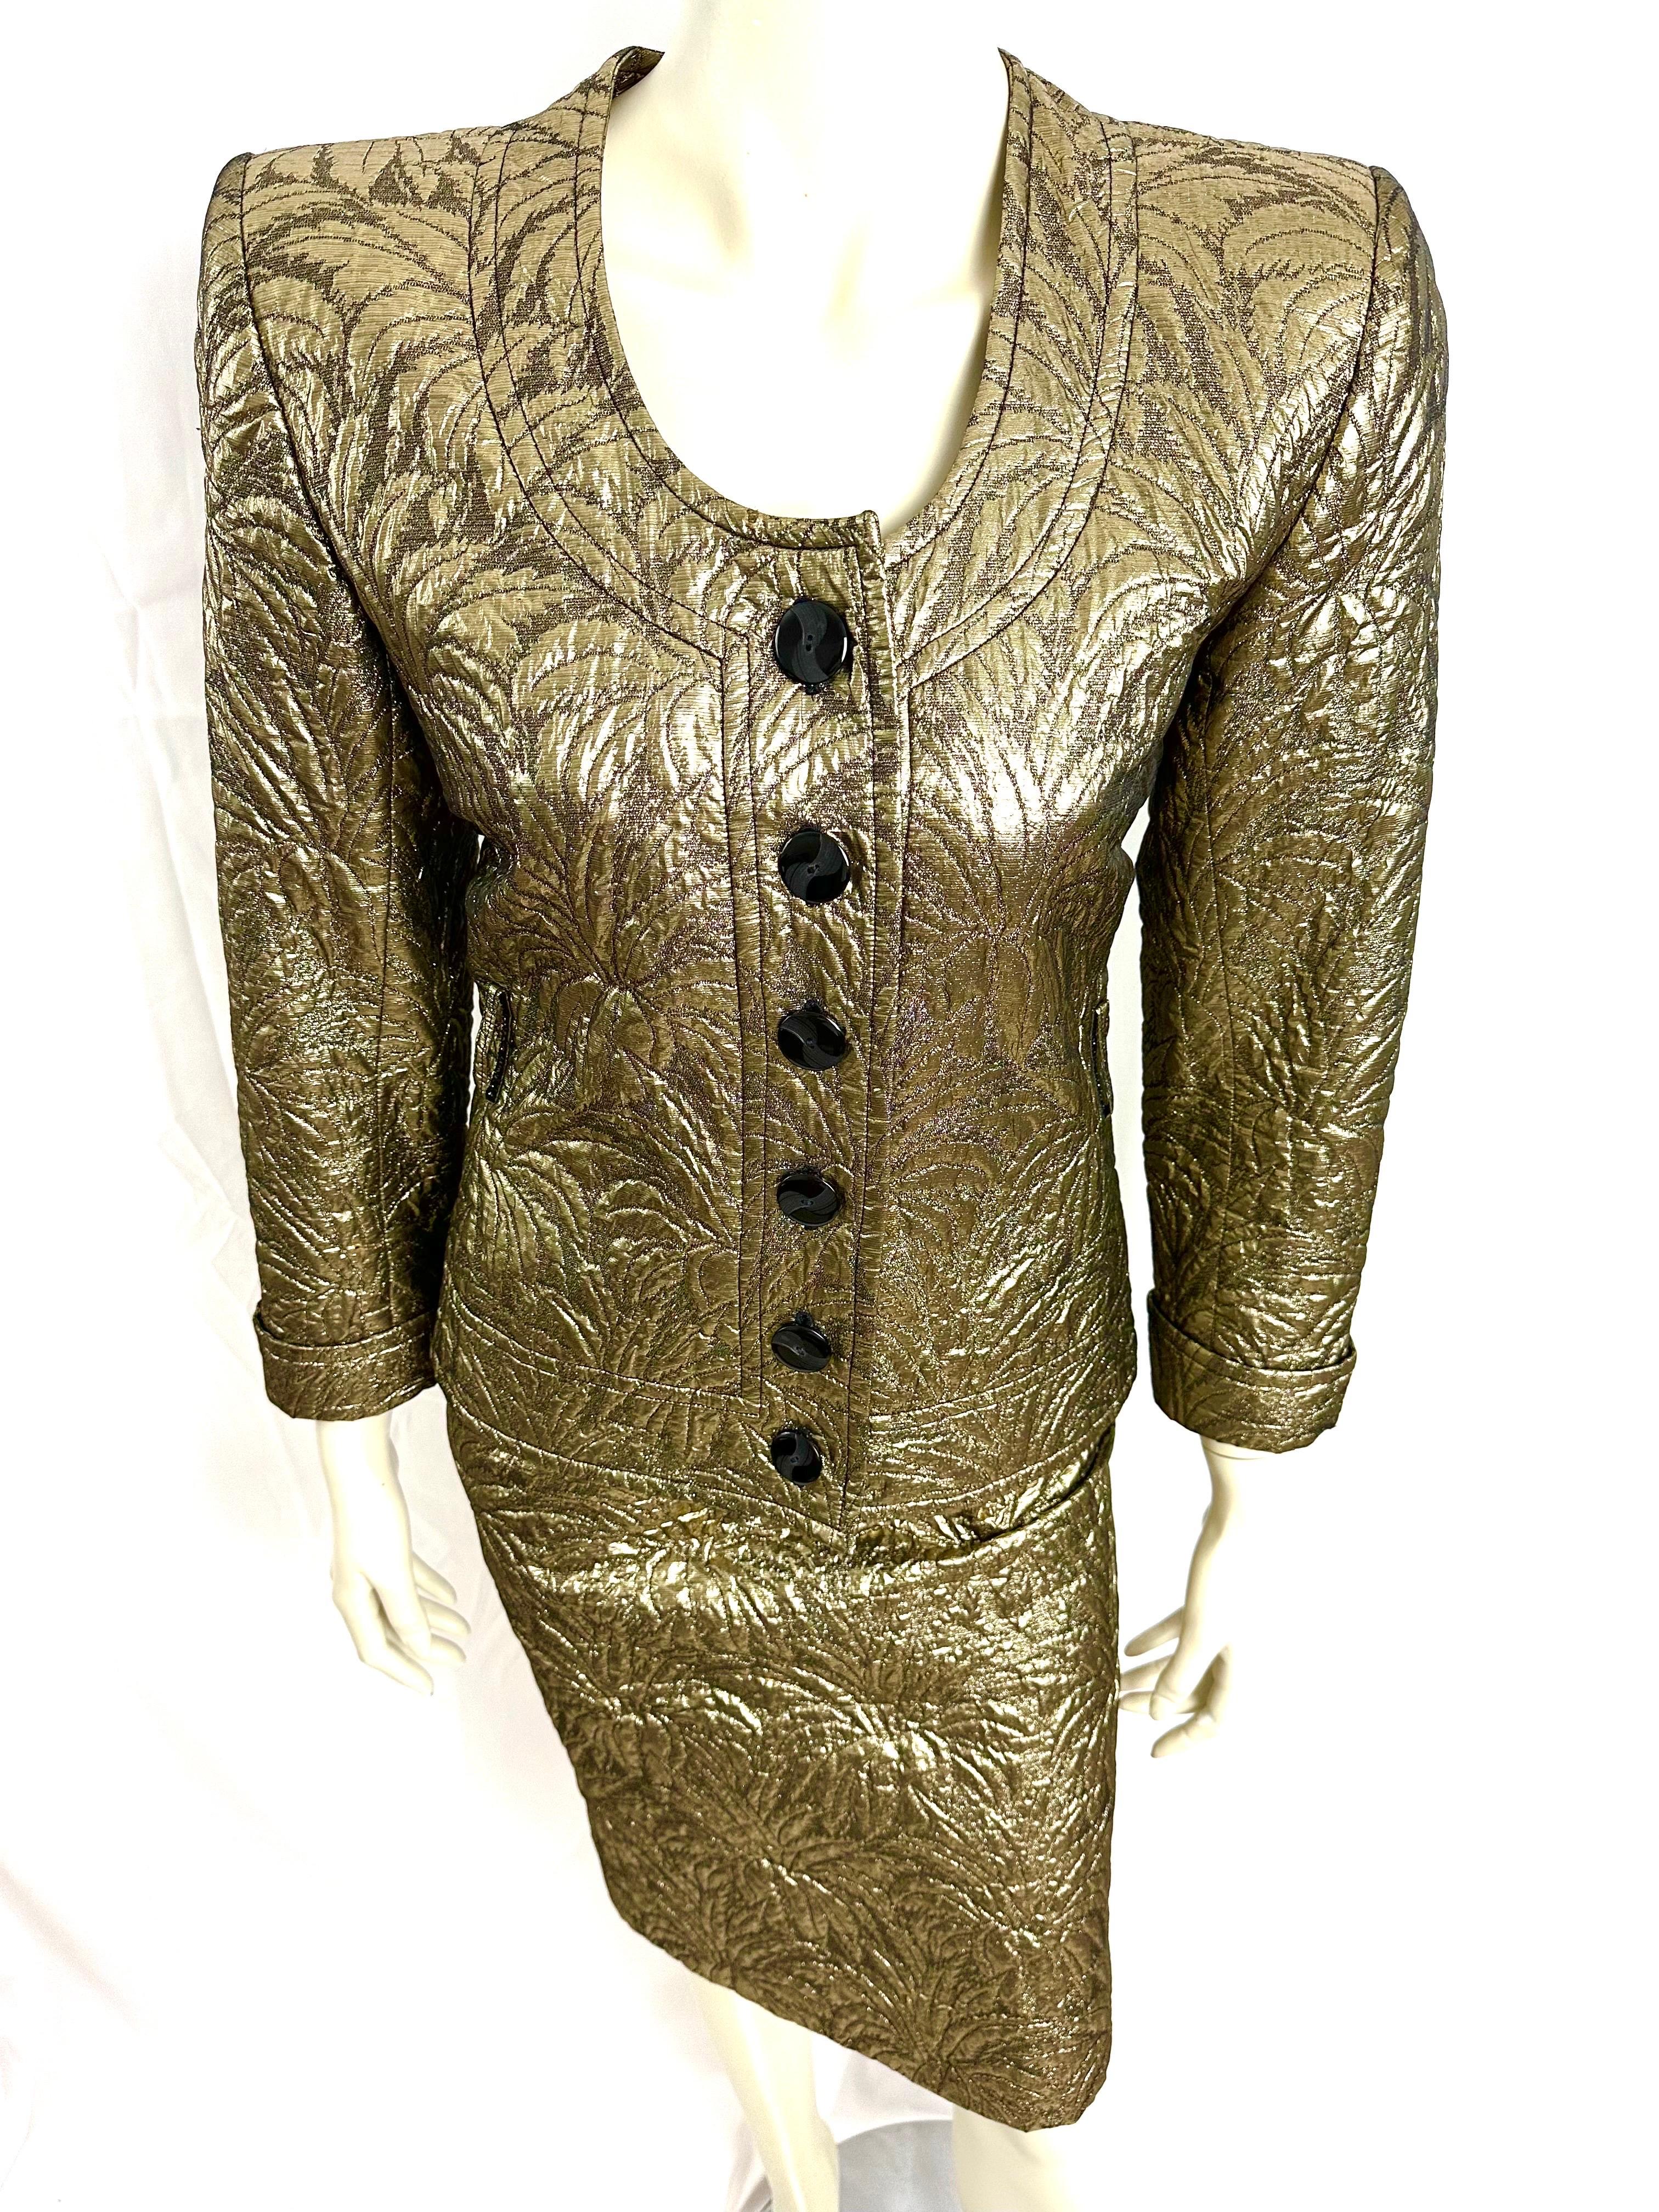 YSL Yves saint Laurent gold brocade skirt suit F/W 86 For Sale 1